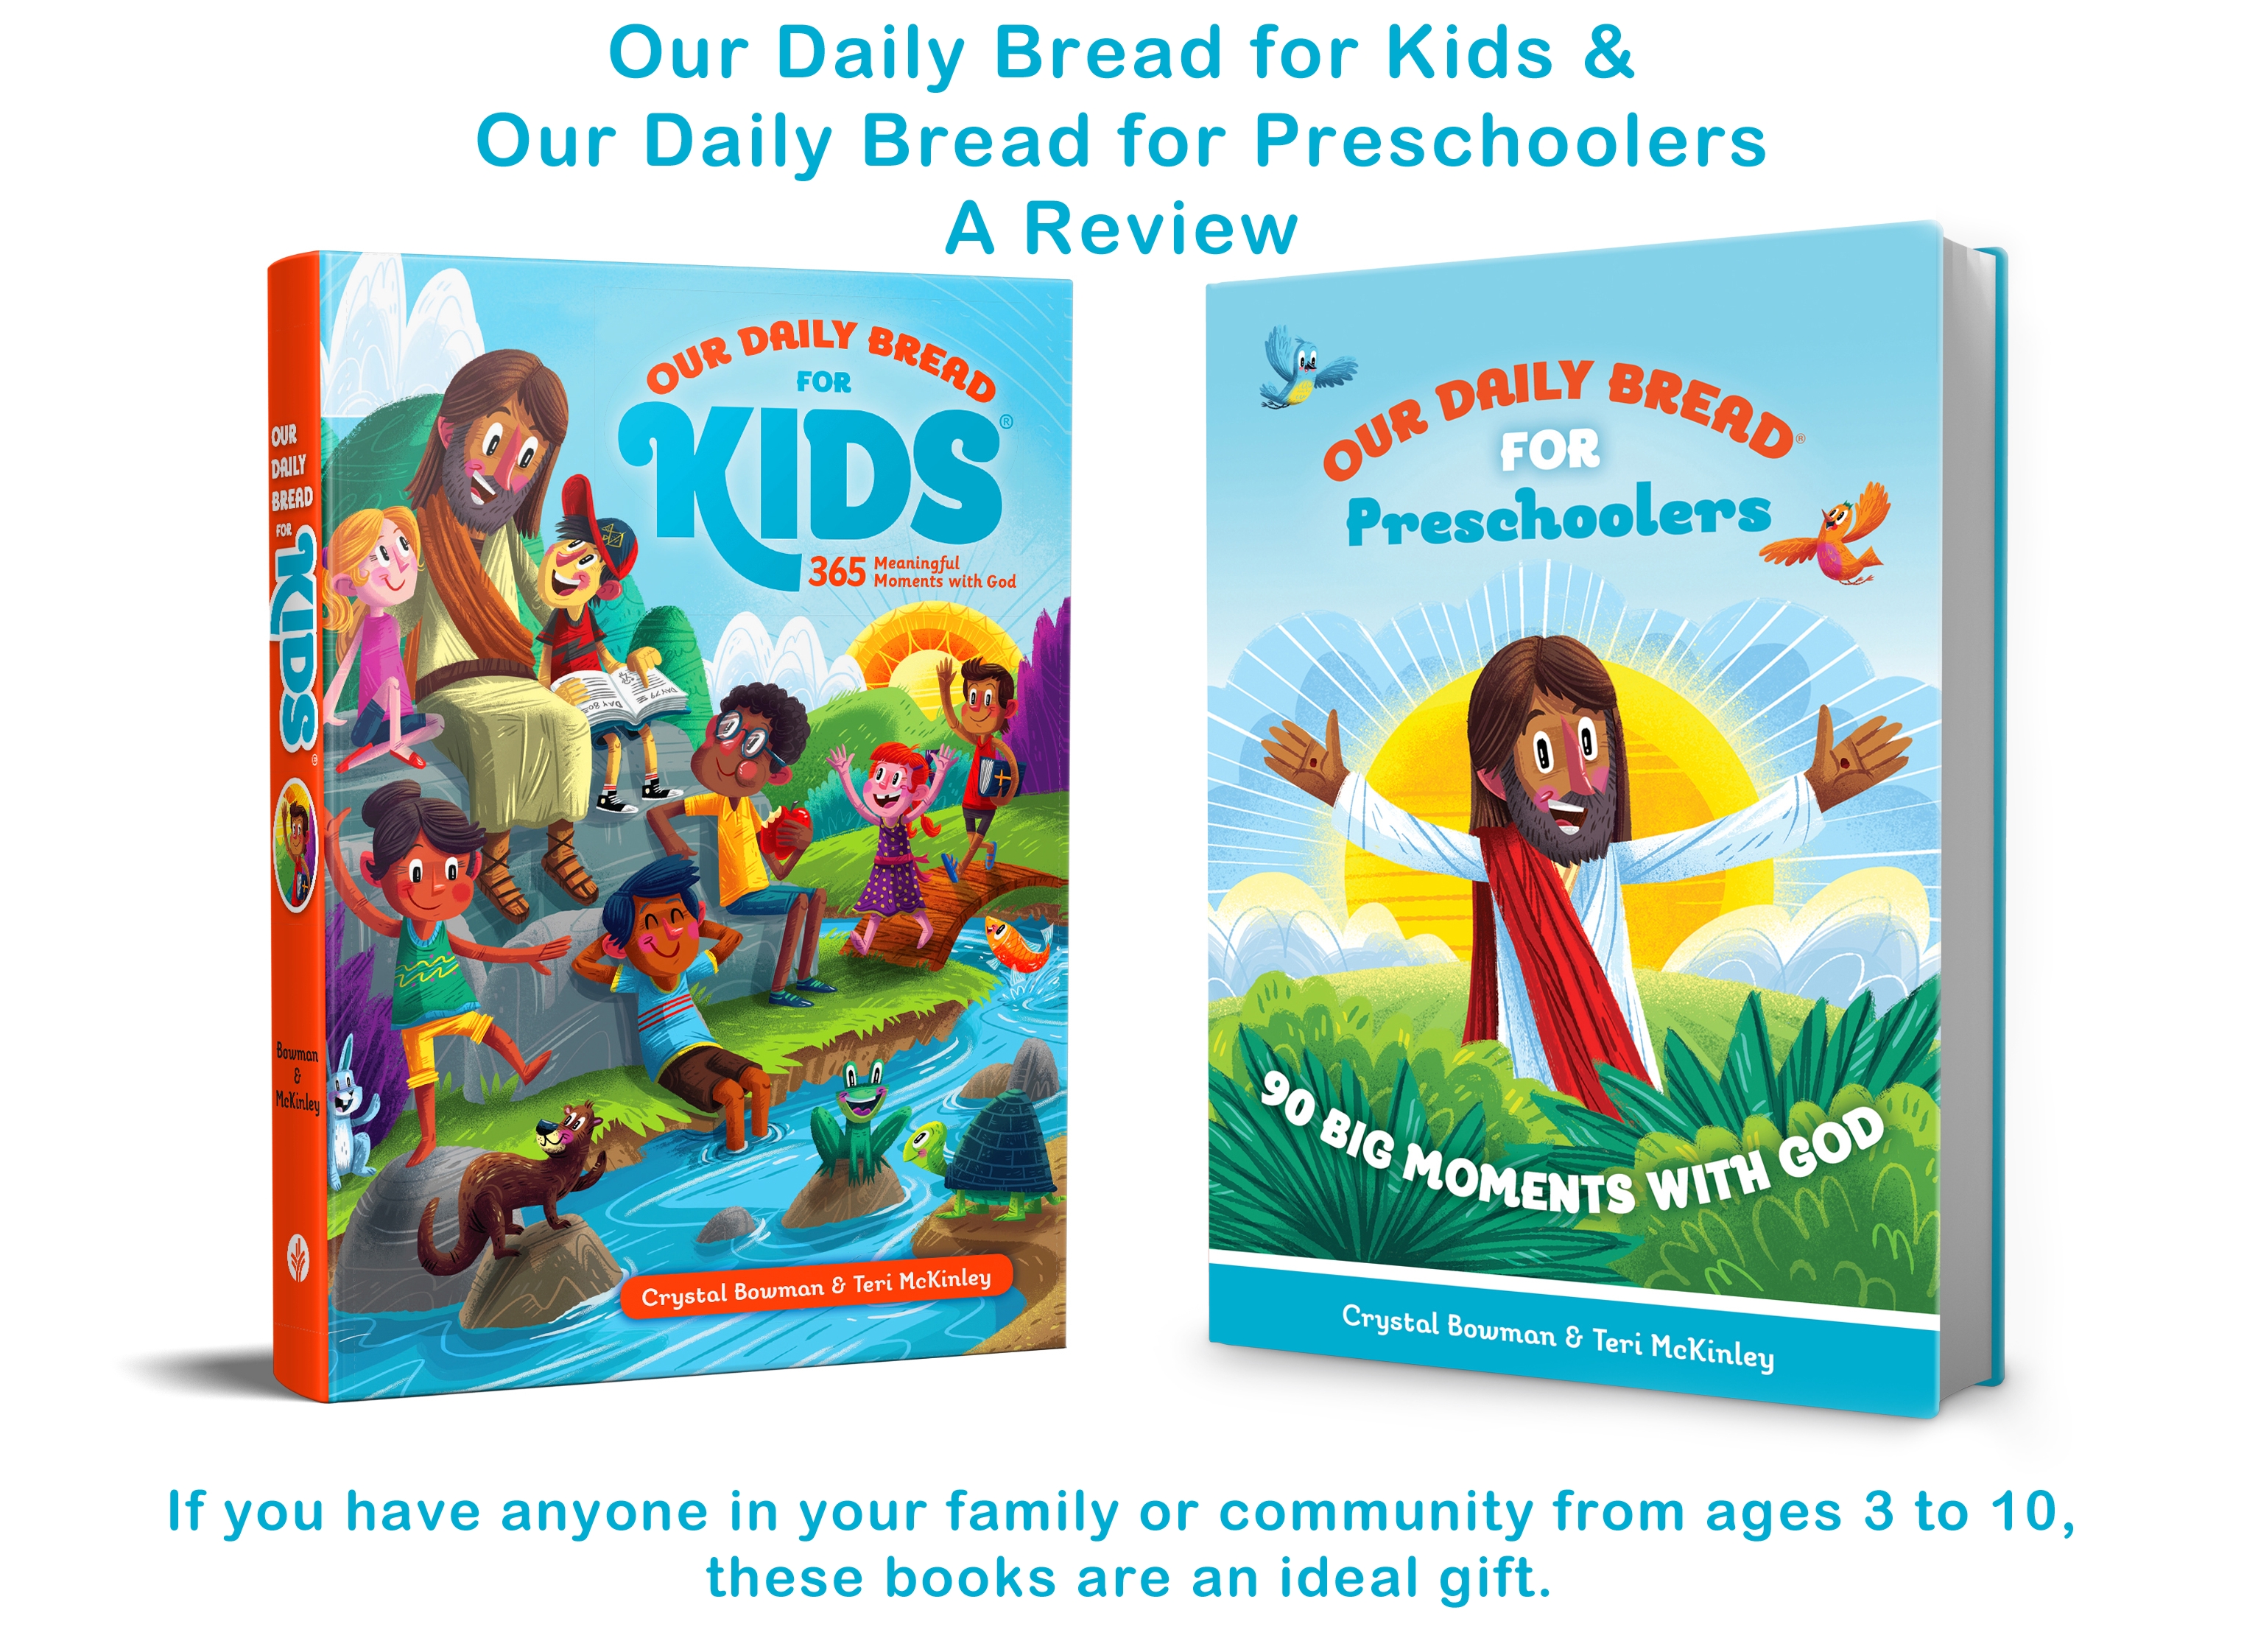 Our Daily Bread for Kids Review